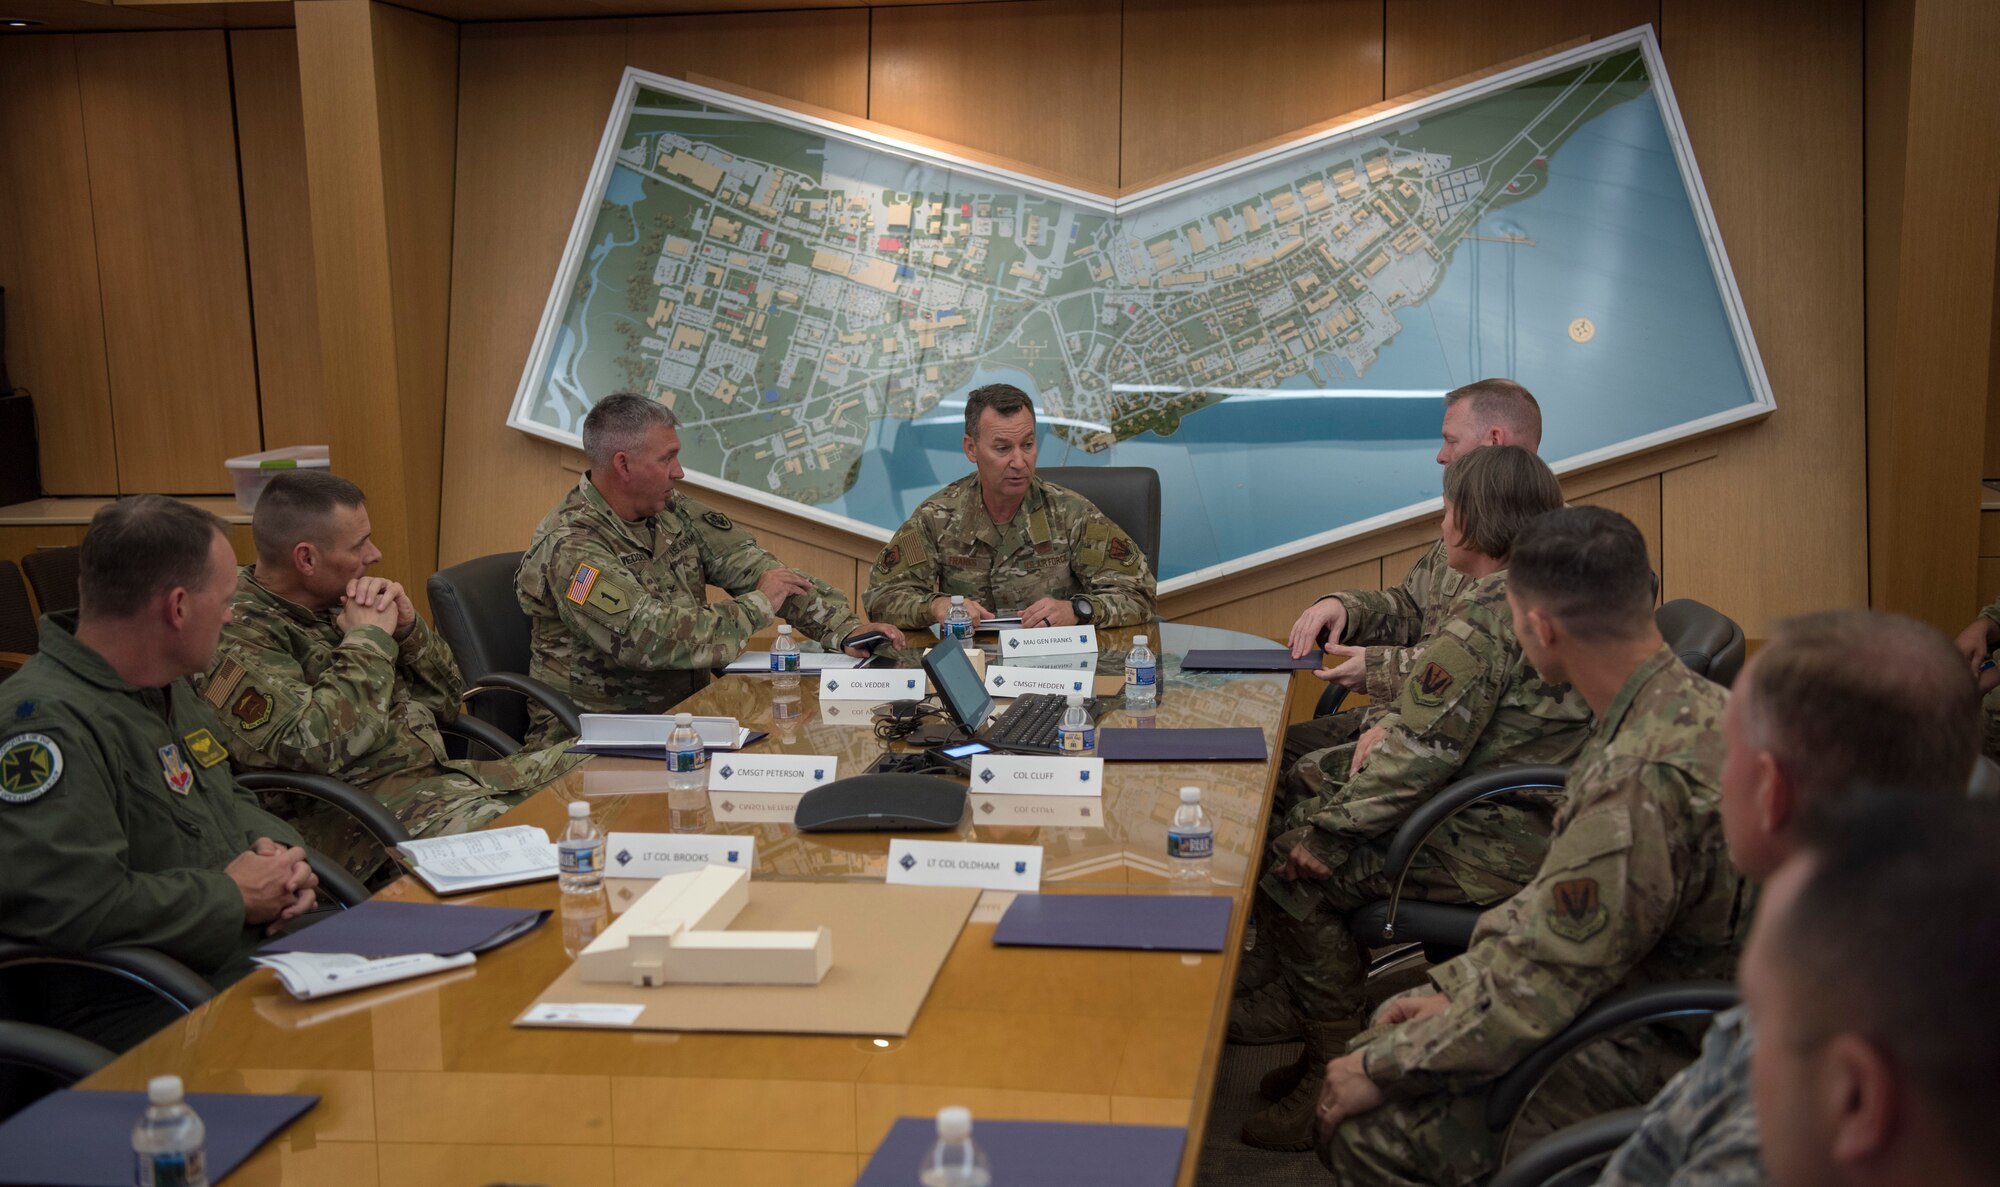 U.S. Air Force Maj. Gen. Chad Franks, center, Ninth Air Force commander, discusses hot topic items with base leadership during a visit at Joint Base Langley-Eustis, Virginia, August 26, 2019.